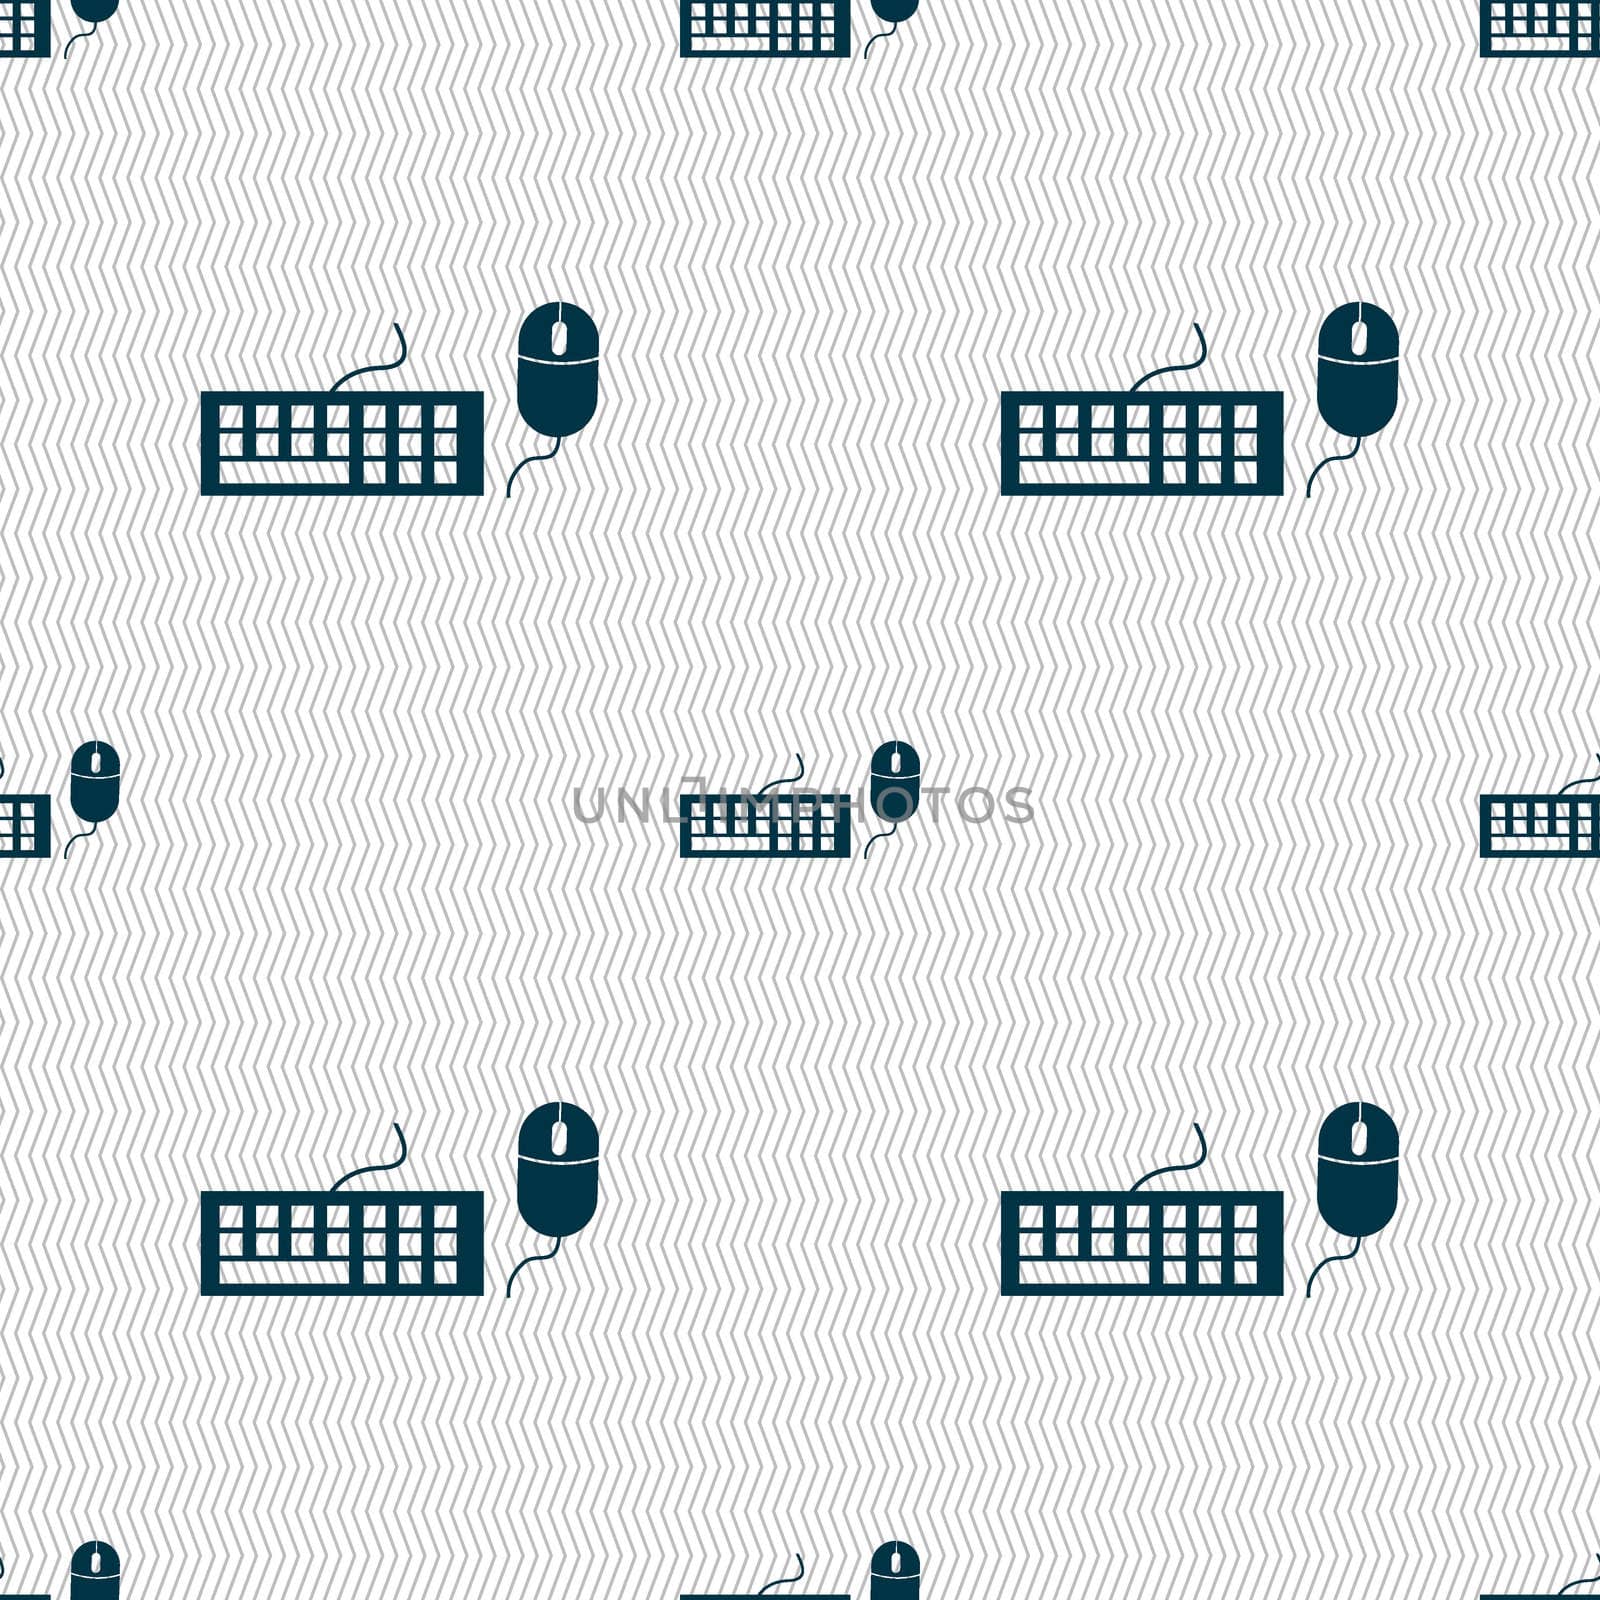 Computer keyboard and mouse Icon. Seamless abstract background with geometric shapes. illustration